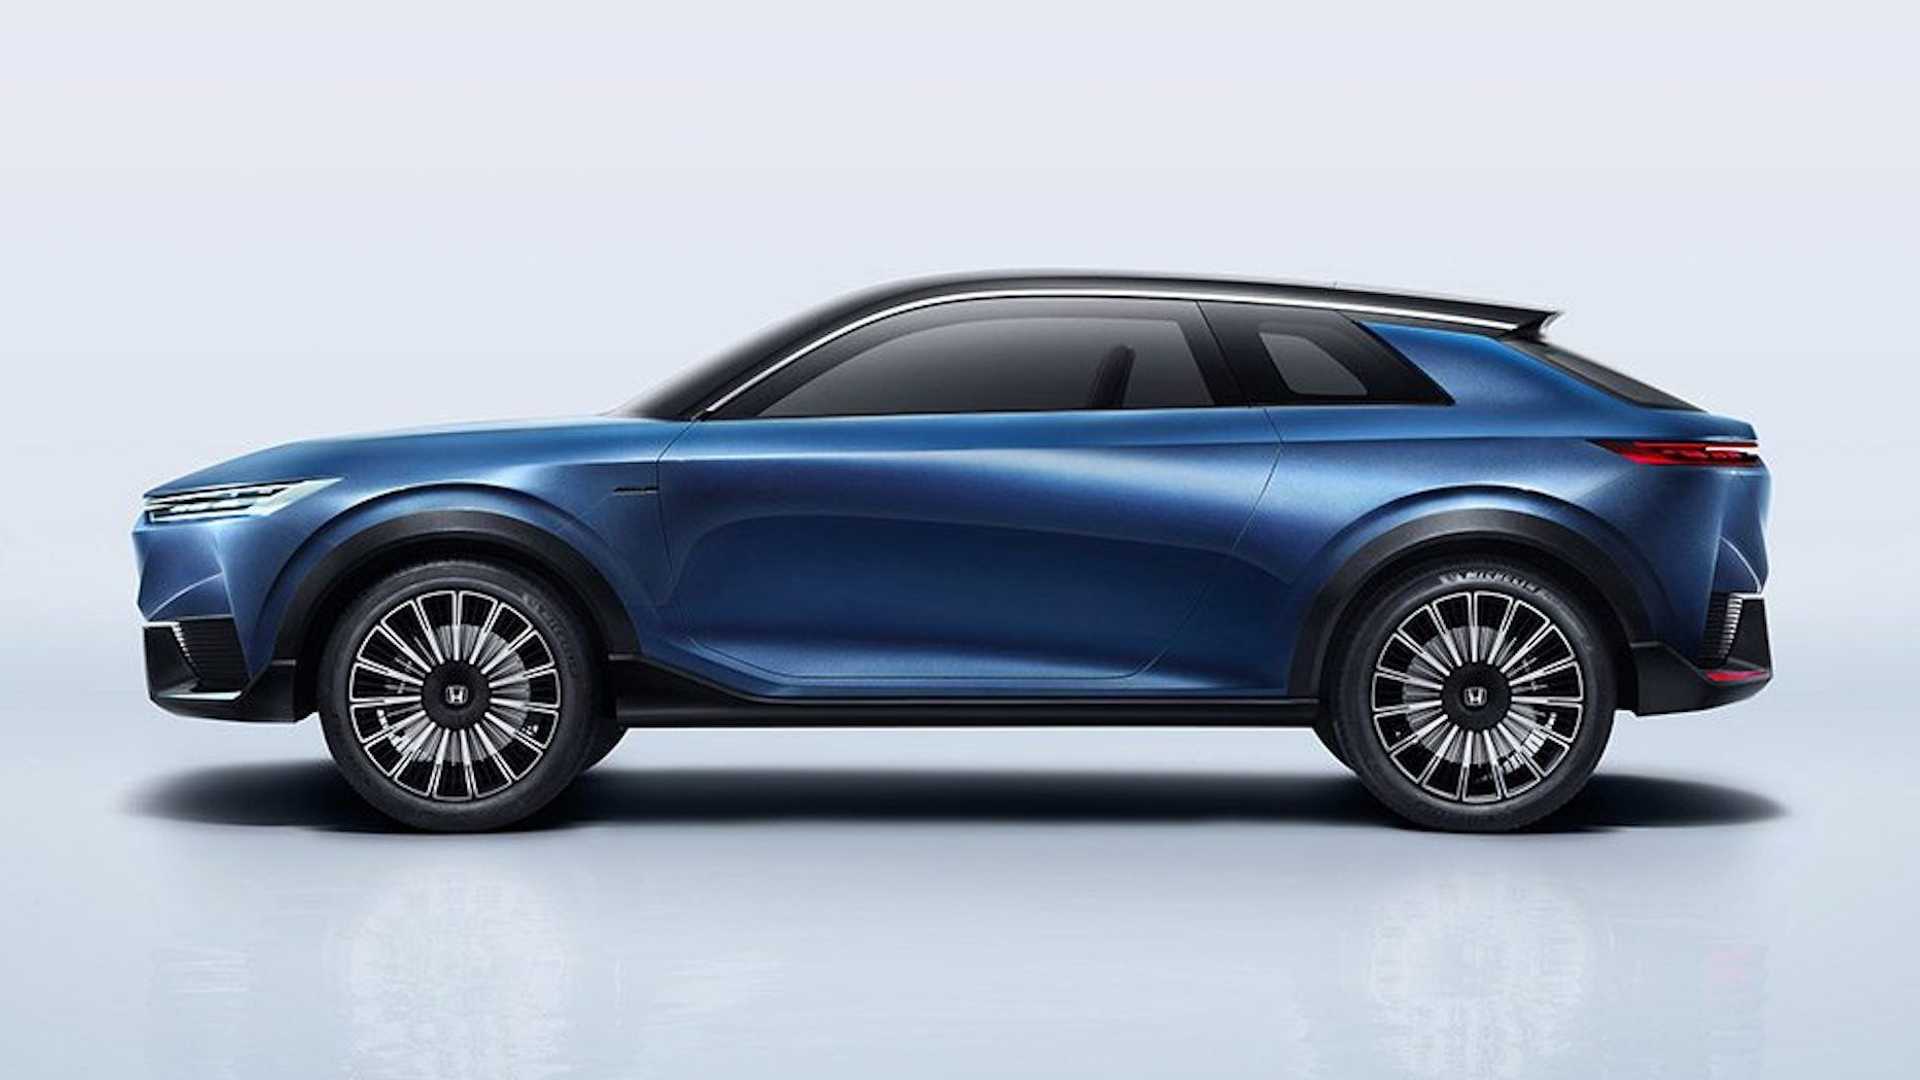 Honda Electric SUV Concept Previews "Future MassProduction Model" for